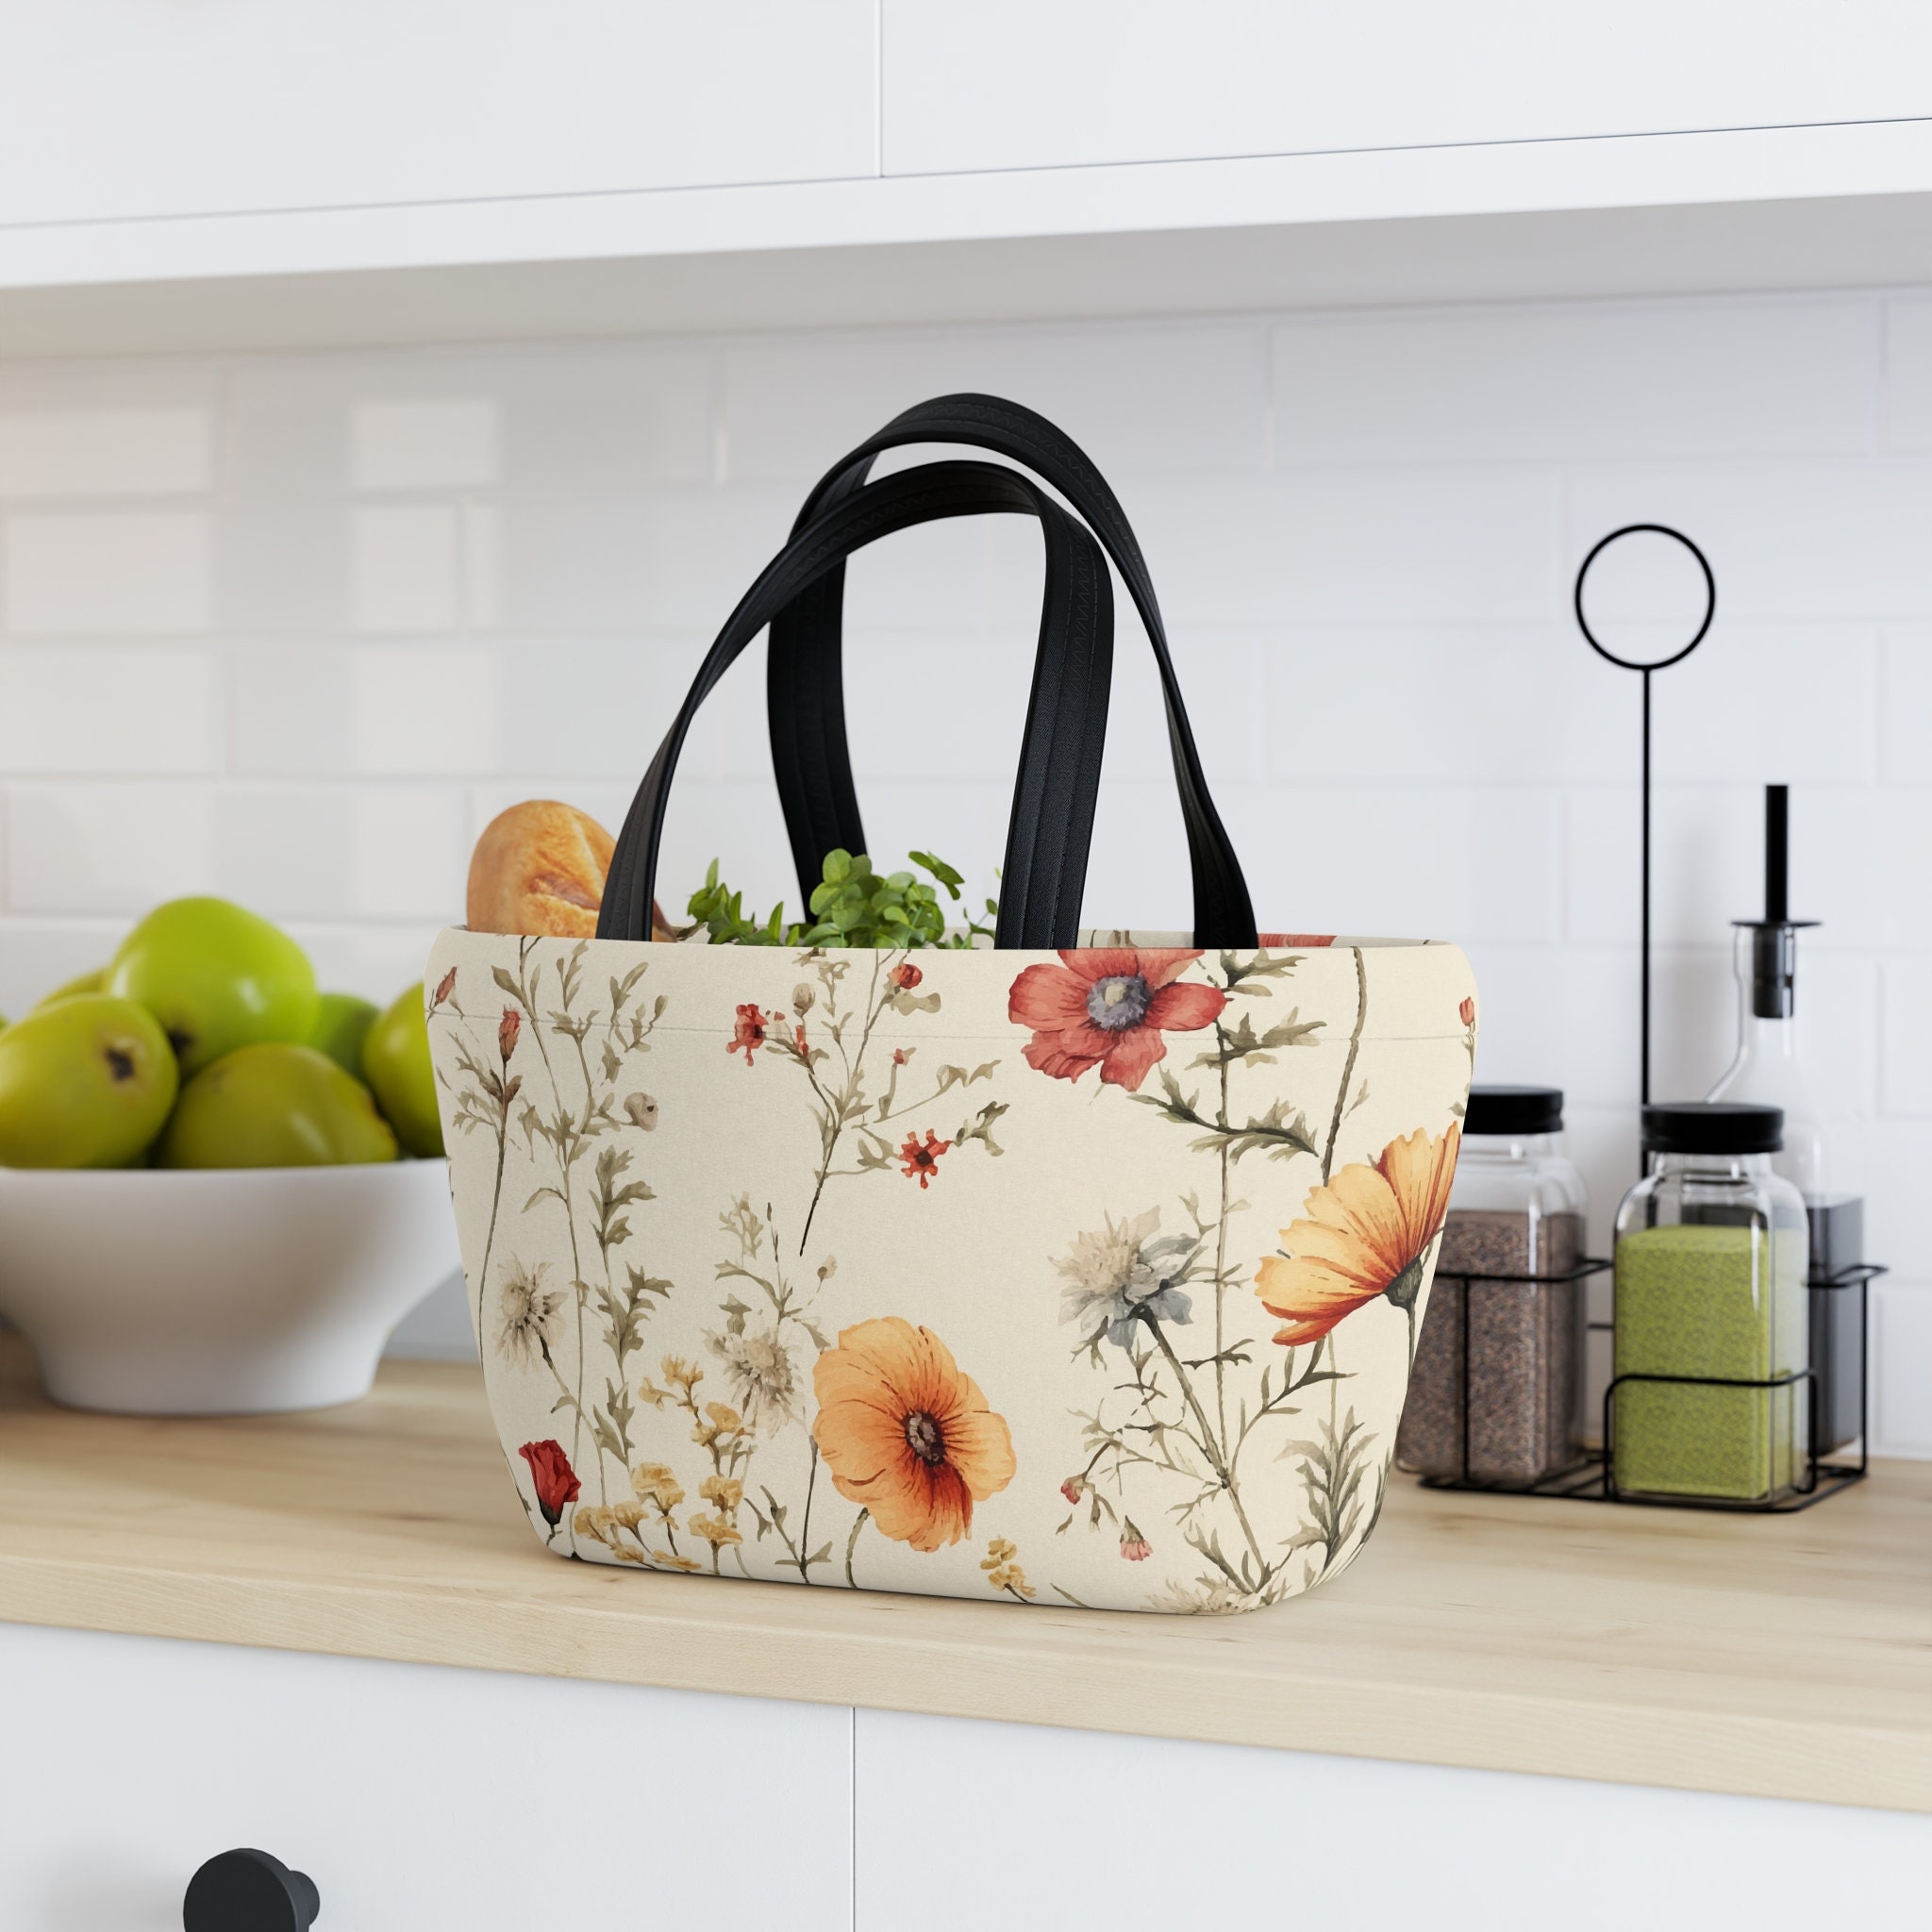 Kasoul® Lunch bags for women Insulated Lunch Box Bag Floral Lunch